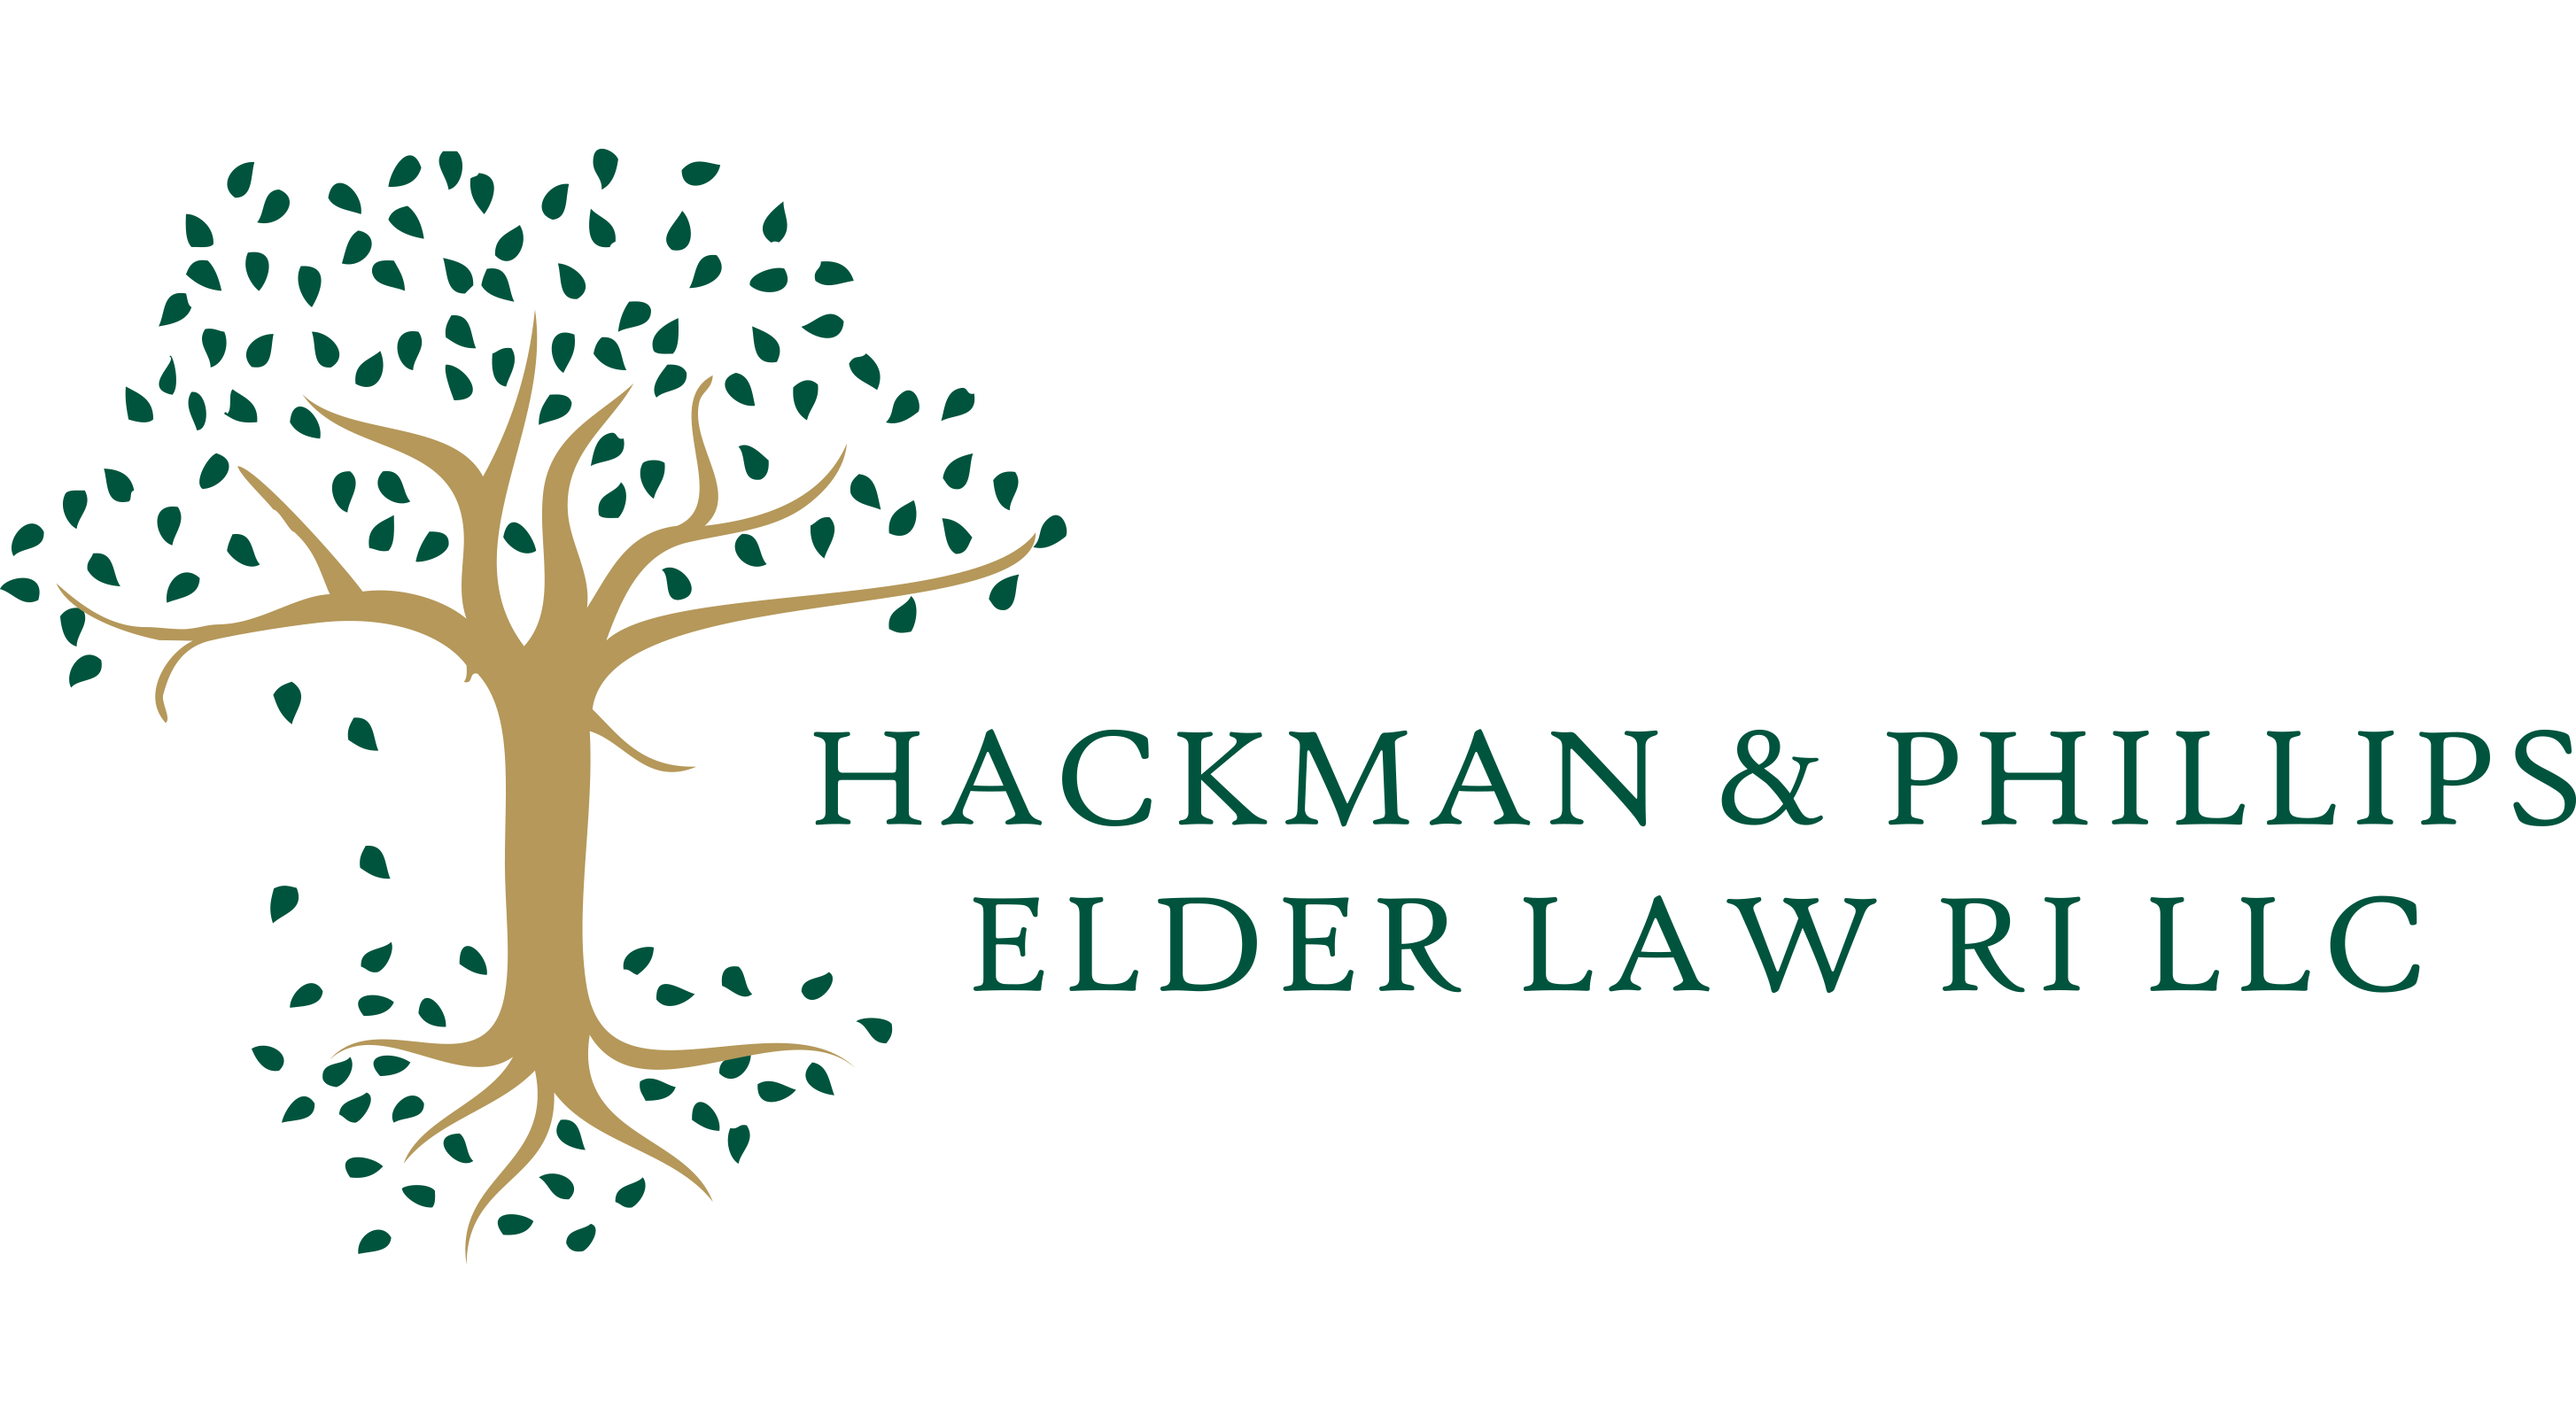 Elder Law and Special Needs Law Firm